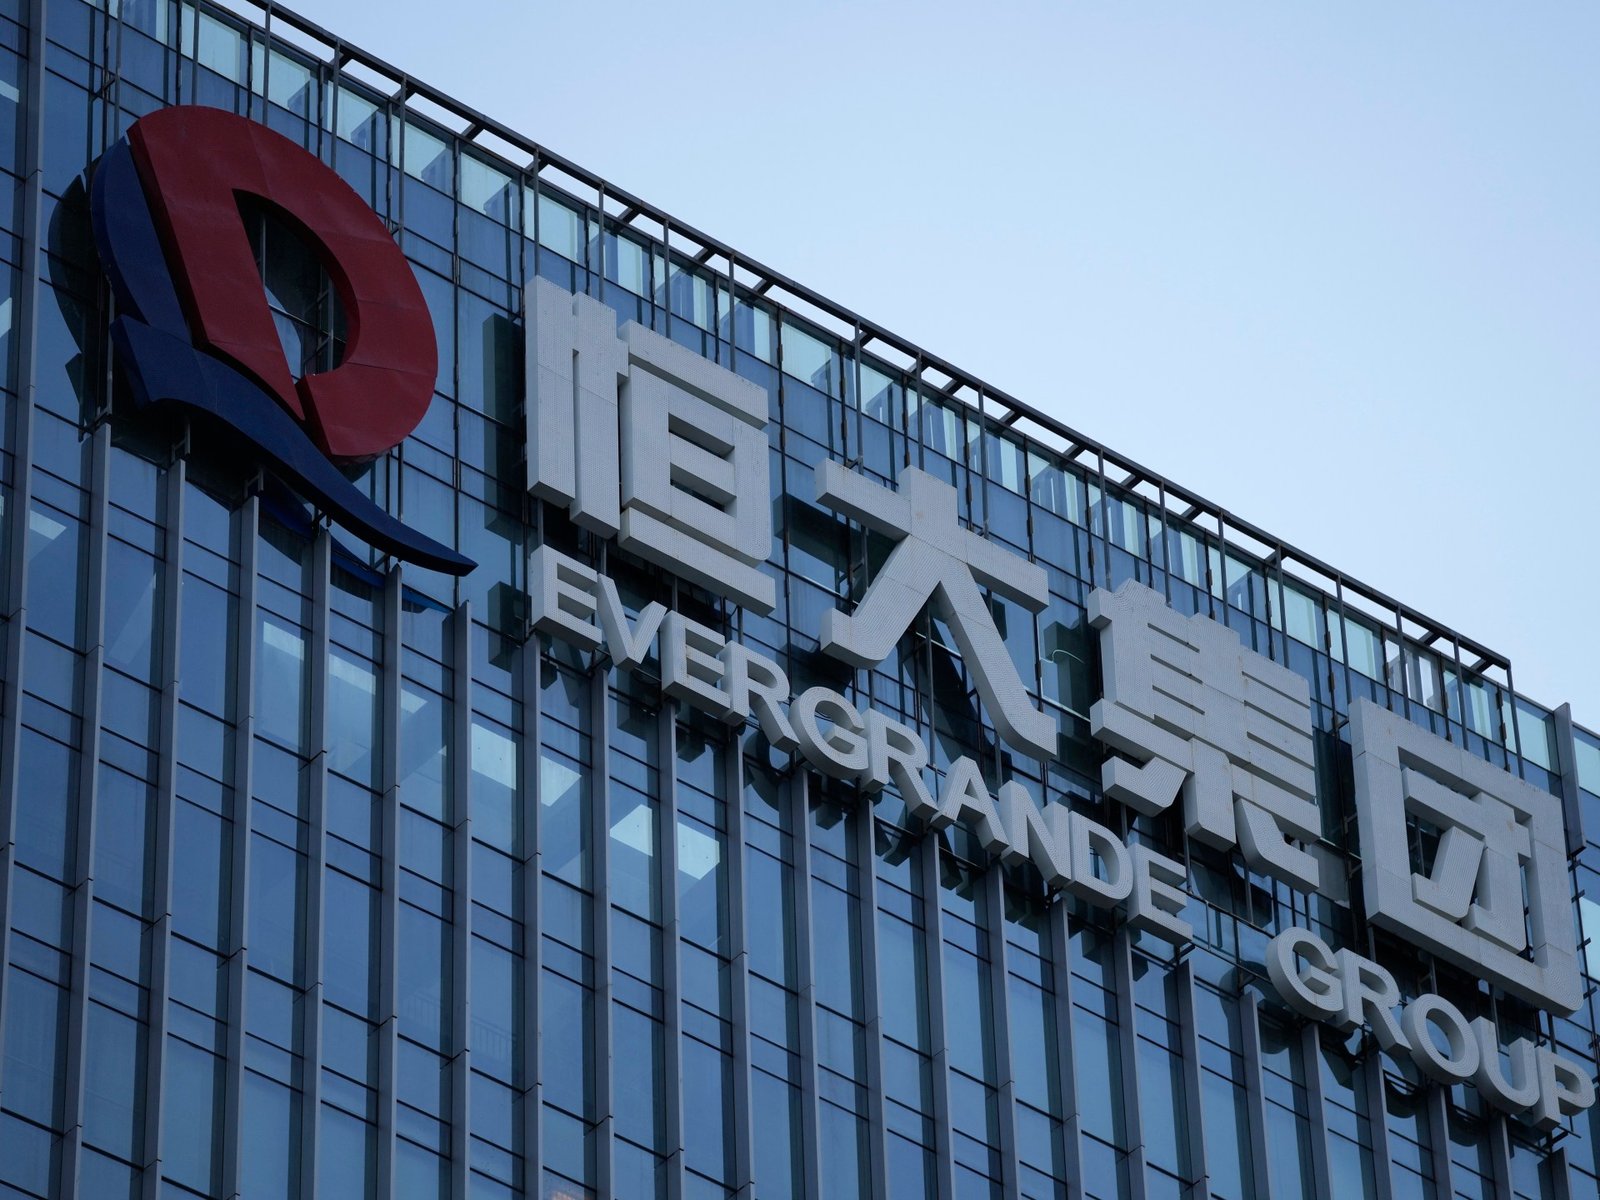 Chinas property giant Evergrande ordered to liquidate as debt talks fail | Economy